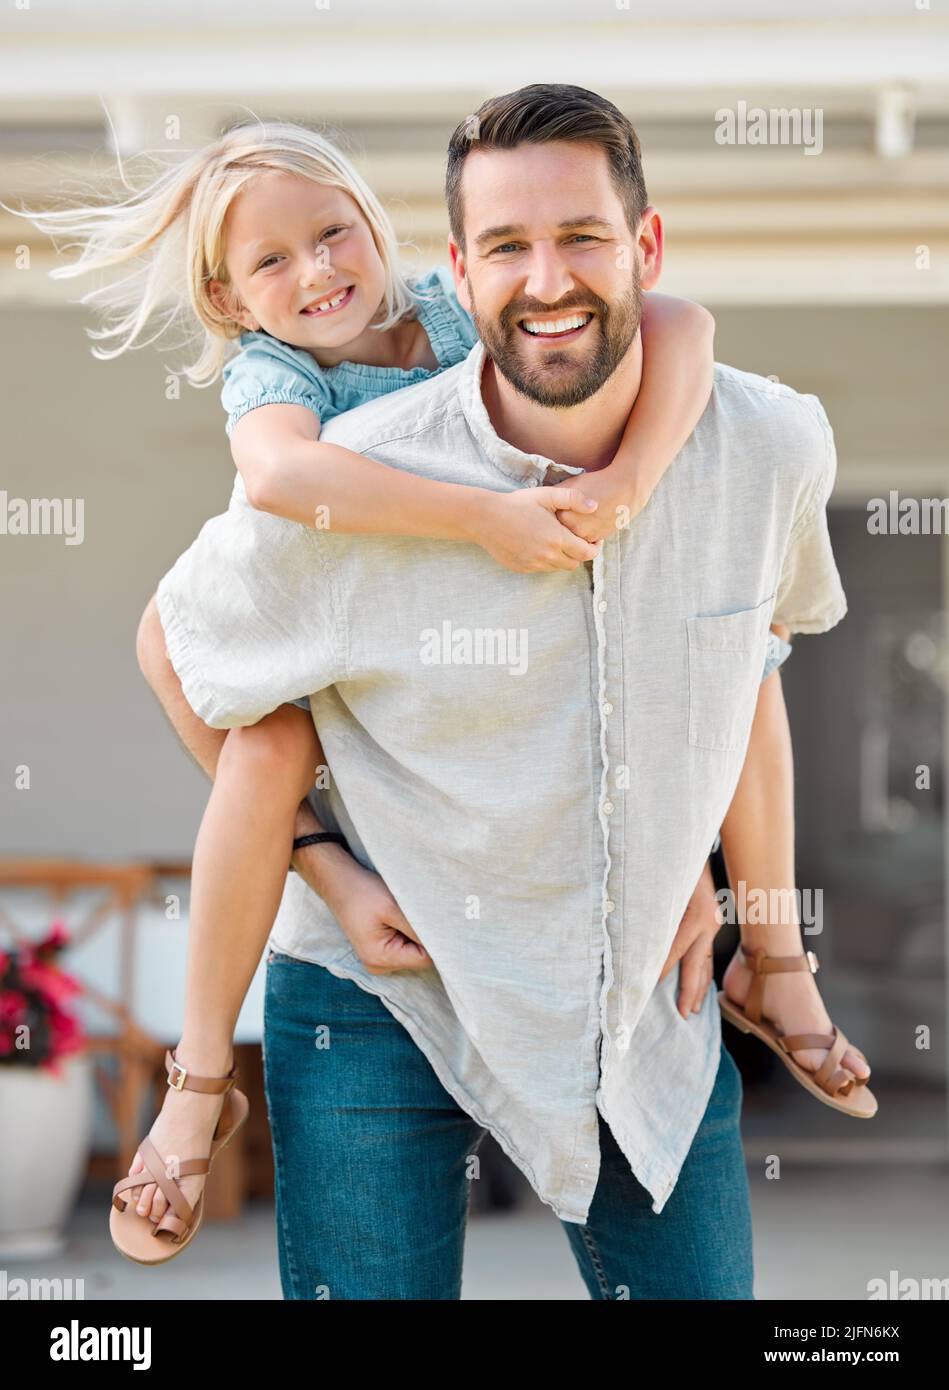 Happy single father giving his little daughter a piggyback ride outside in the garden. Smiling caucasian single parent bonding with his adorable child Stock Photo